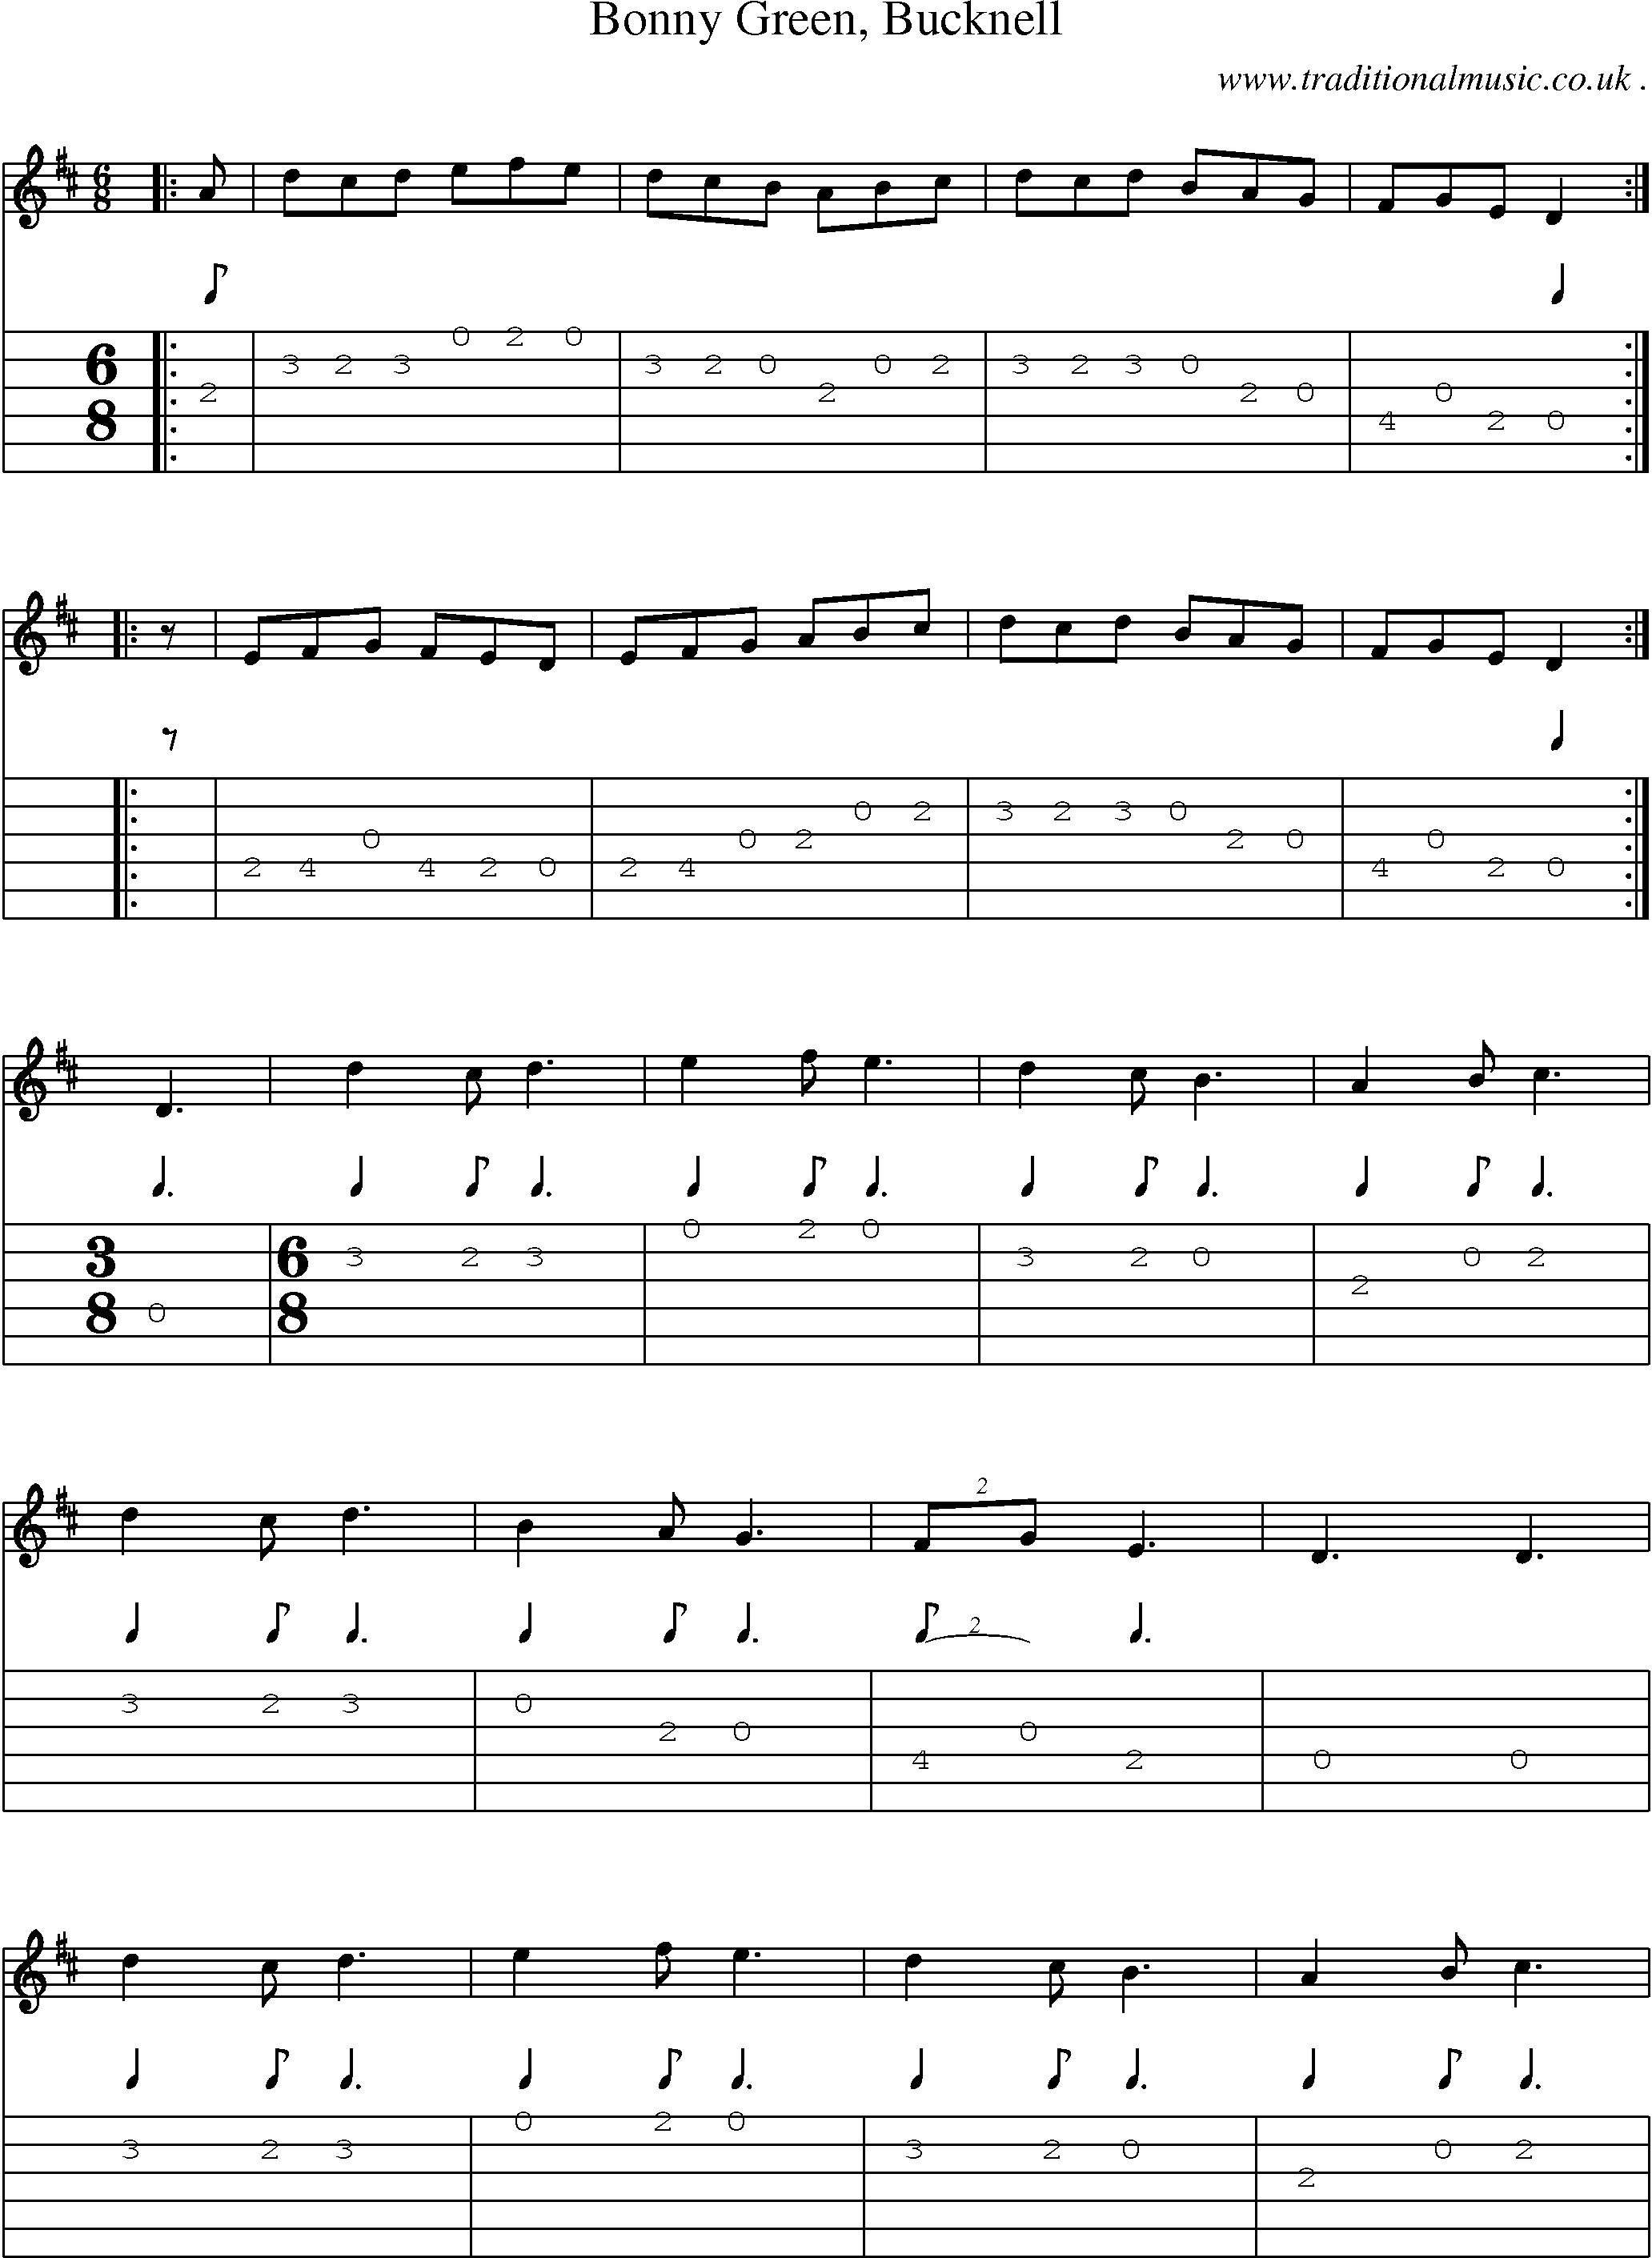 Sheet-Music and Guitar Tabs for Bonny Green Bucknell